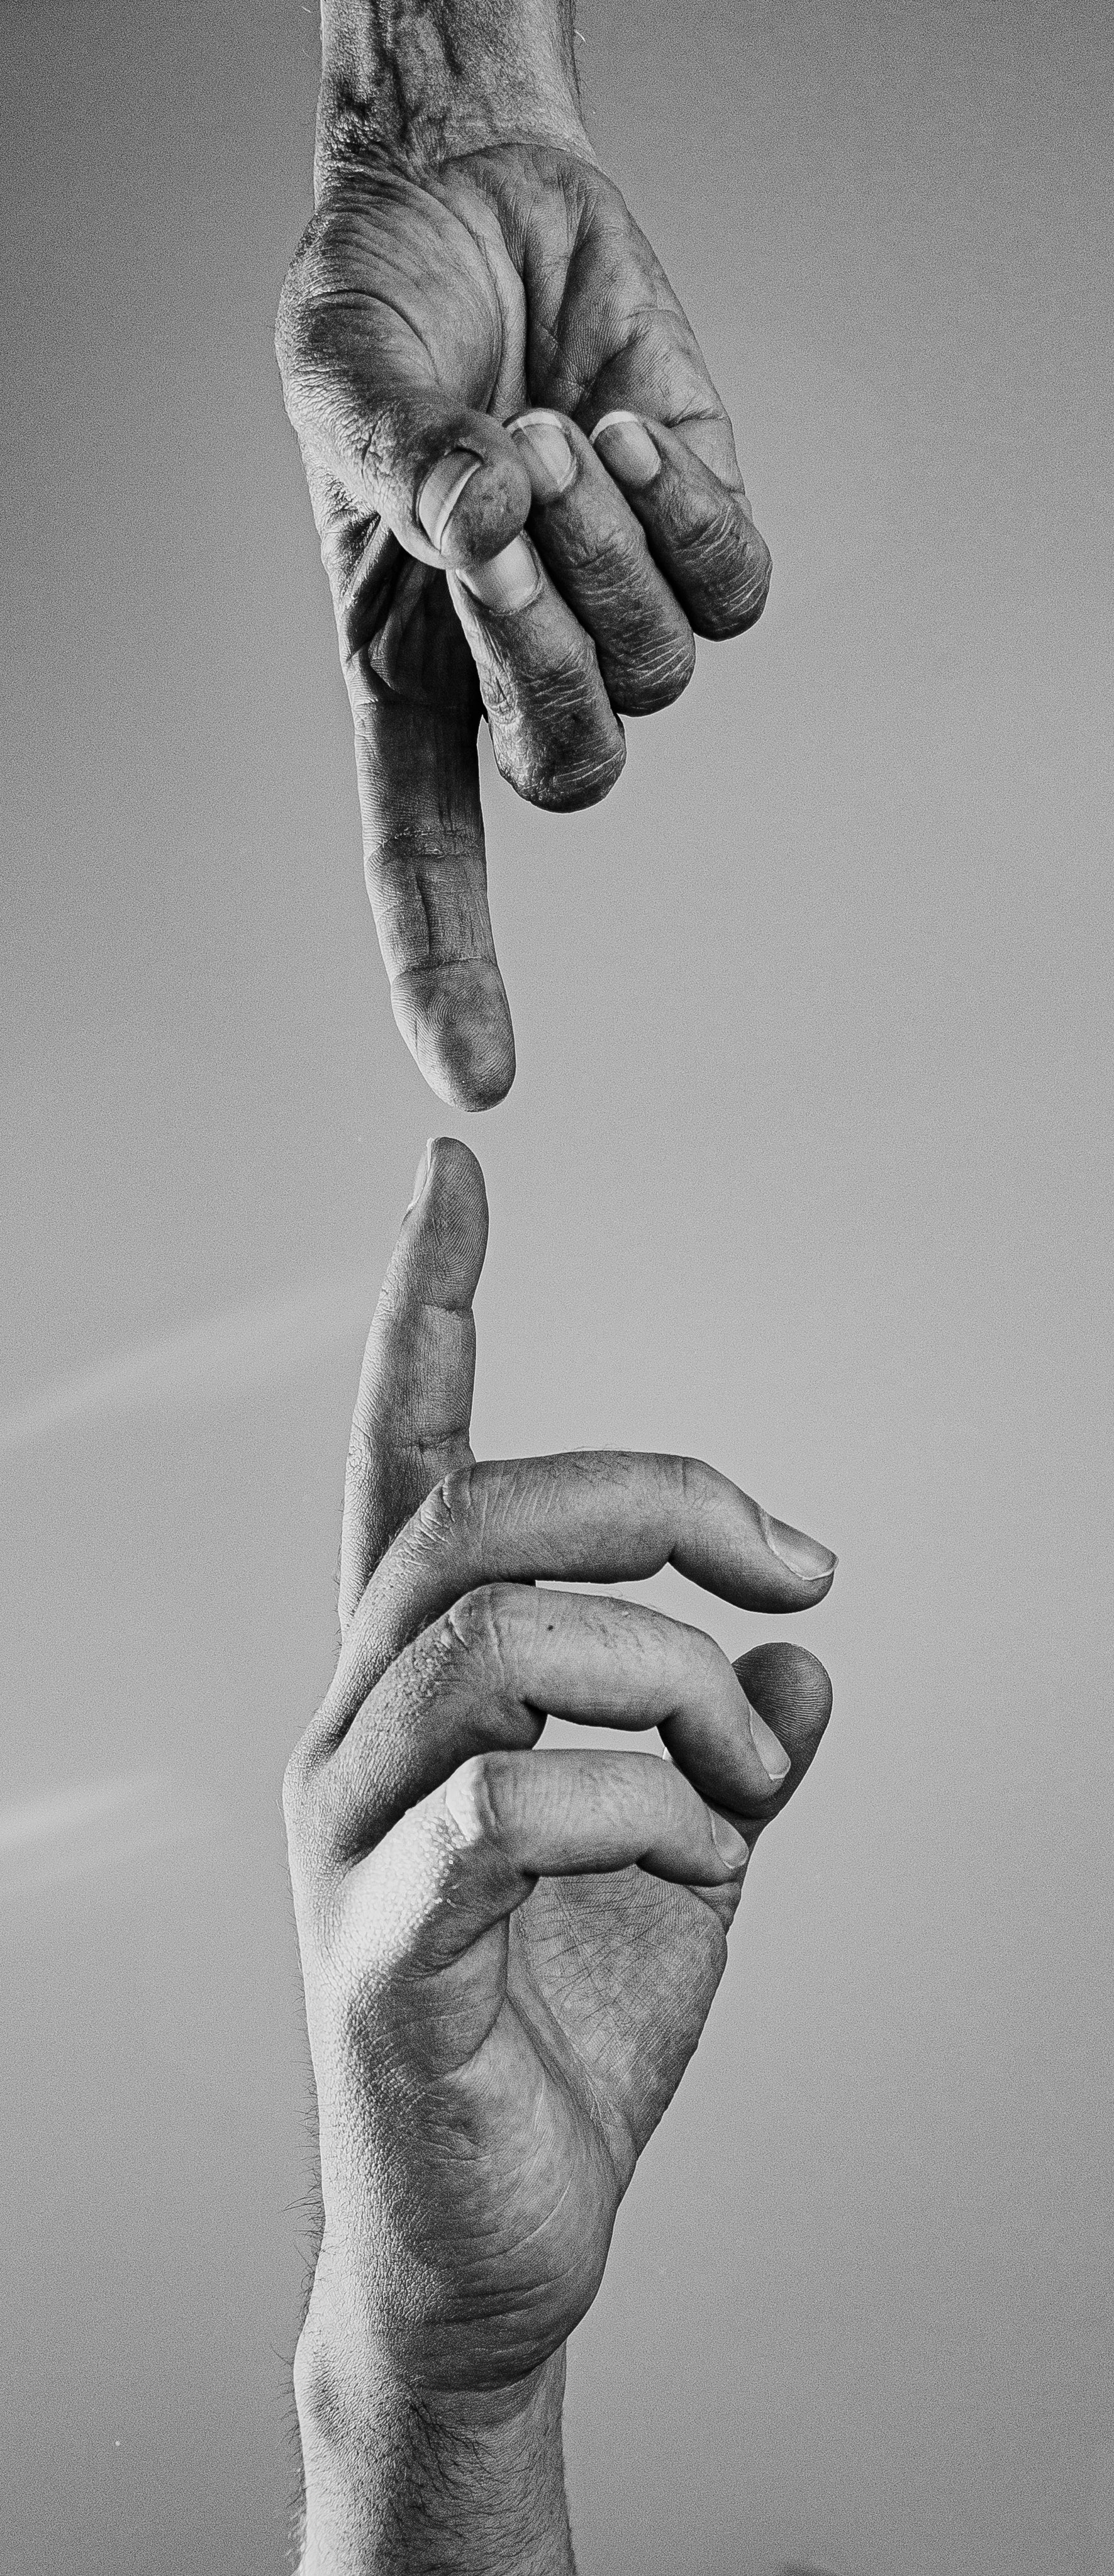 two-reaching-hands-in-black-and-white.jpg